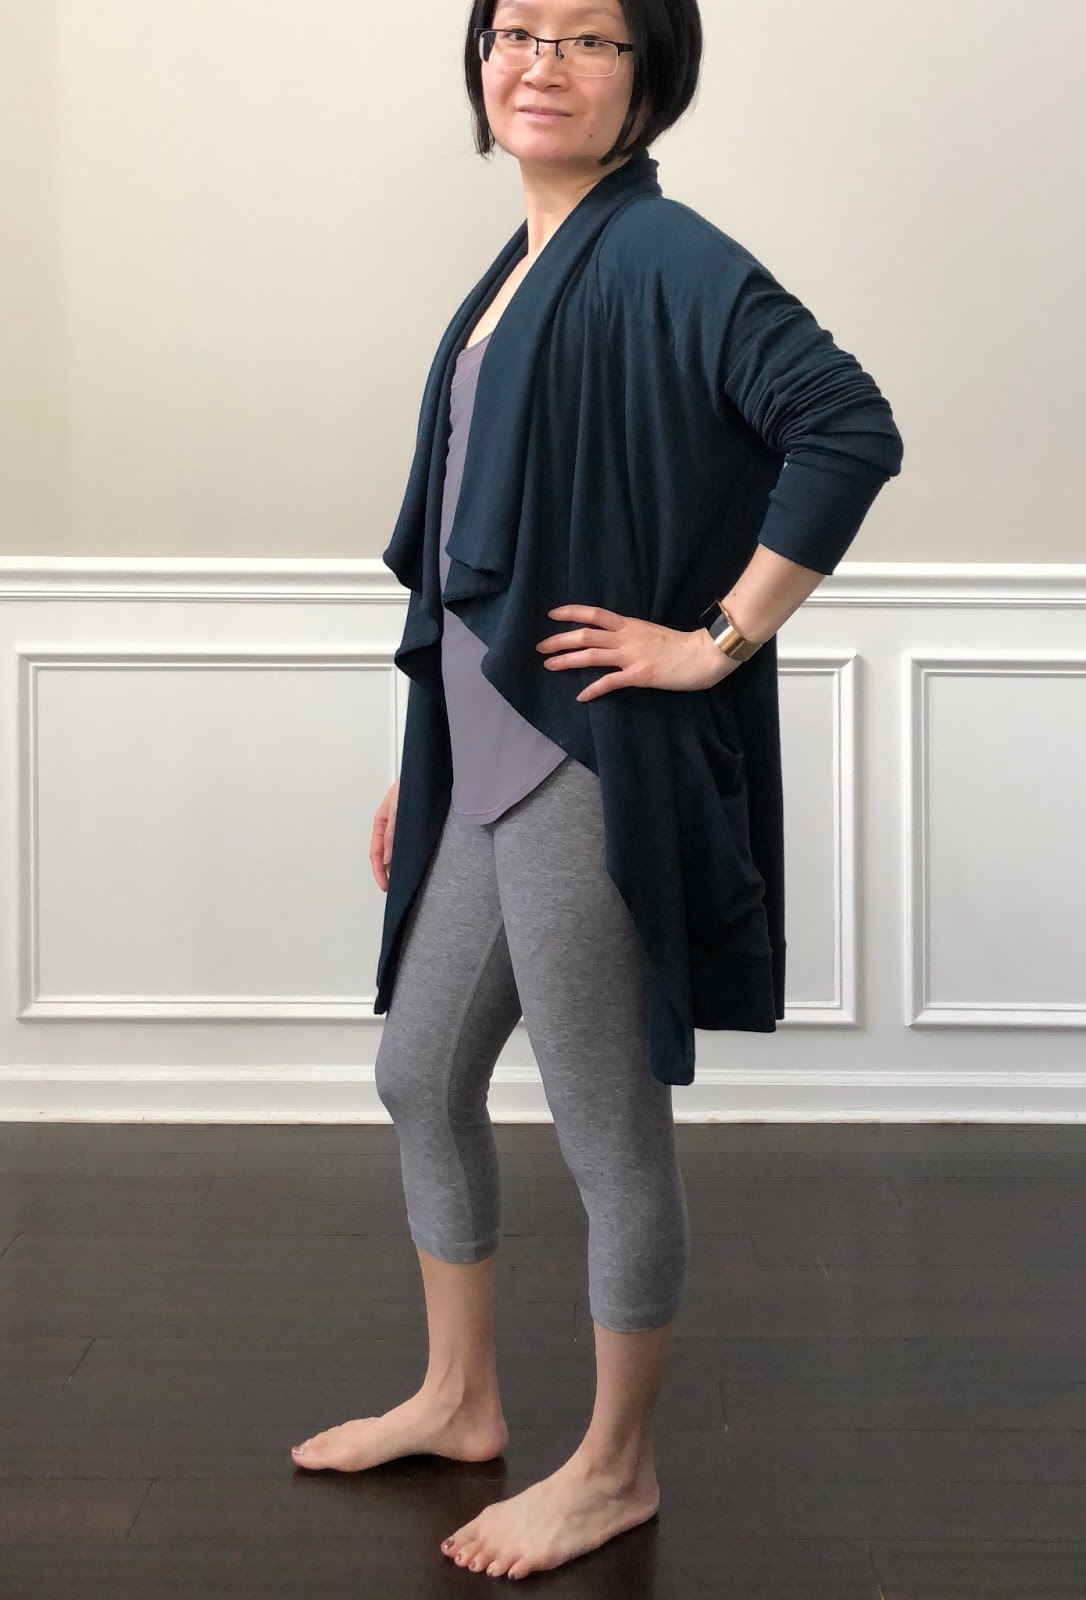 Just Posted - I FOUND THE BEST ALTERNATIVE EVER FOR THE ATHLETA PRANAYAMA  WRAP!!! One wrap is $89, one wrap is $28!!!! They are both incredibly soft  and comfortable too! (Affiliate links)